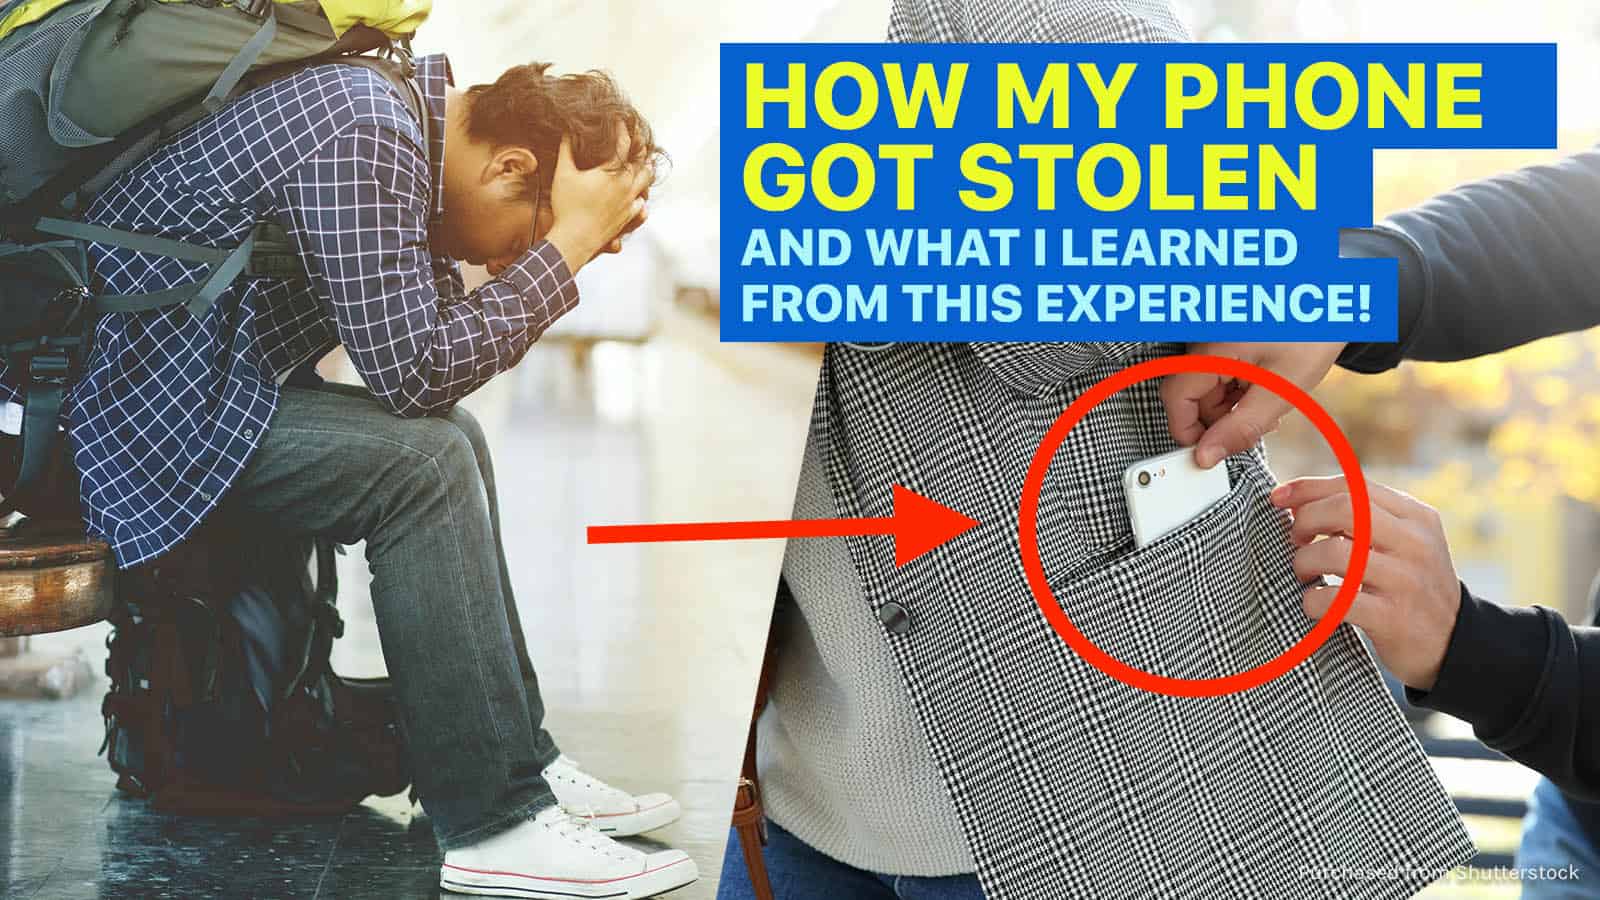 8 Tips to Protect Yourself From Pickpockets - Centre for Security